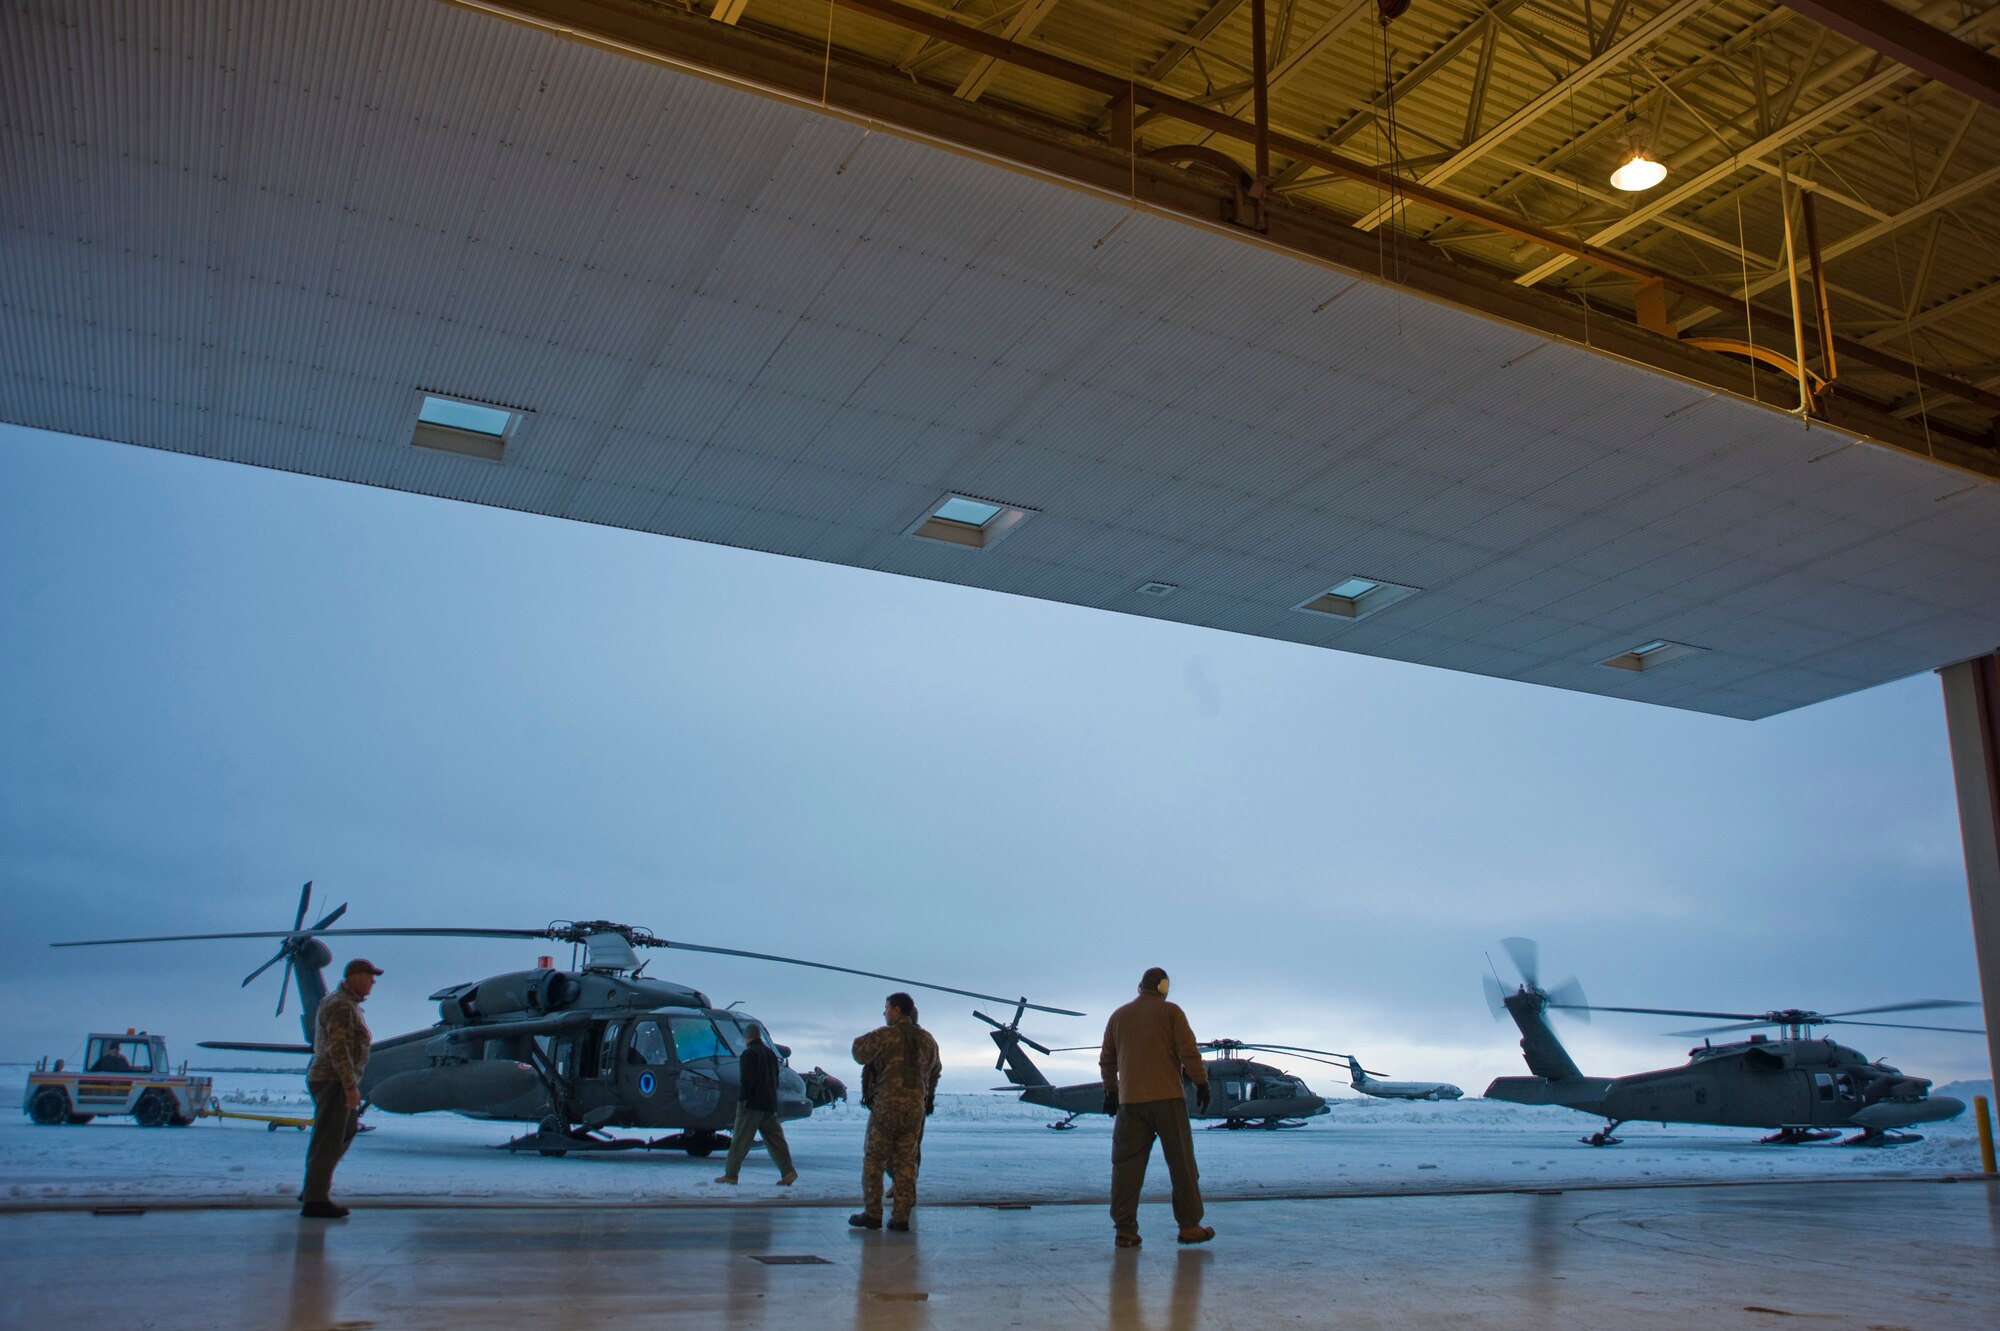 Soldiers from the Alaska Army National Guard's 1st 207 Aviation Regiment guide a Black Hawk onto the flight line in Bethel, Alaska, March 12, 2009. The 1st 207 Aviation Regiment is responsible for transporting all medical teams and supplies during Operation Arctic Care, a Navy-led readiness exercise providing no-cost health care to 14 villages in Western Alaska's Yukon-Kuskokwim region. (U.S. Air Force photo by Senior Airman Christopher Griffin)